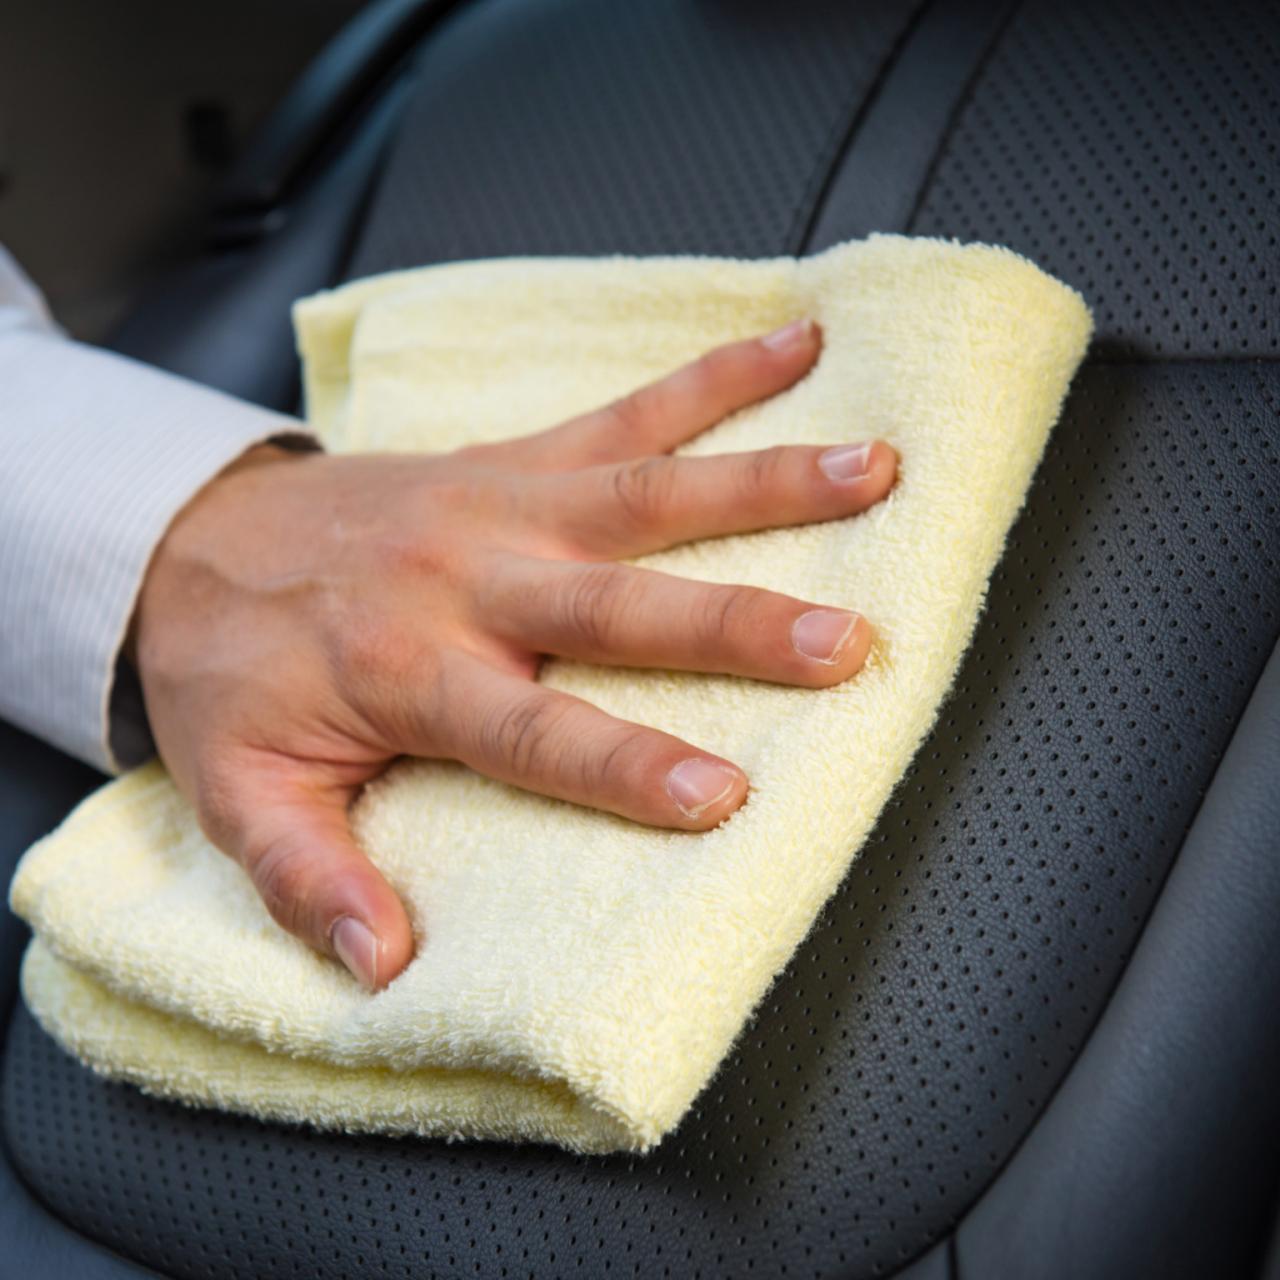 The Best Leather Car Seat Cleaners Including from Brands like Leather  Honey and Chemical Guys